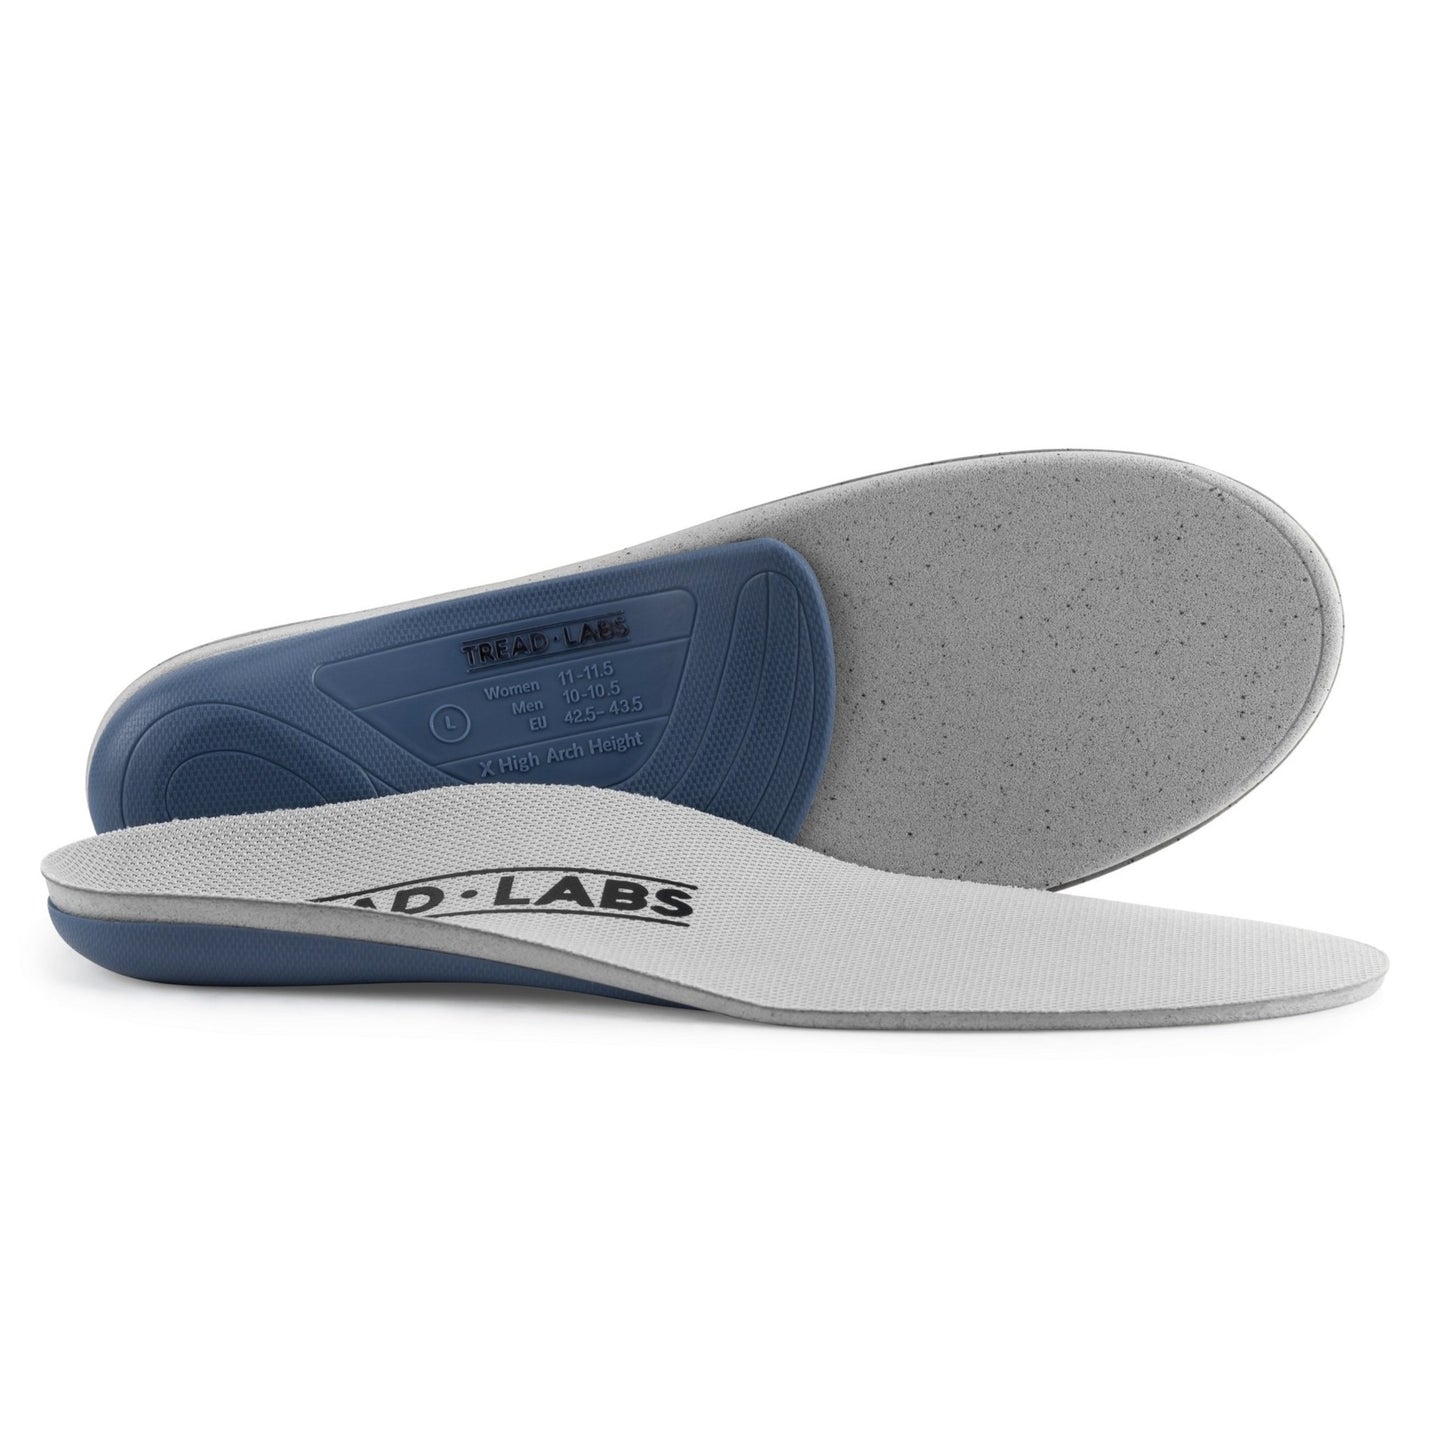 Refurbished Pace orthotics by Tread Labs